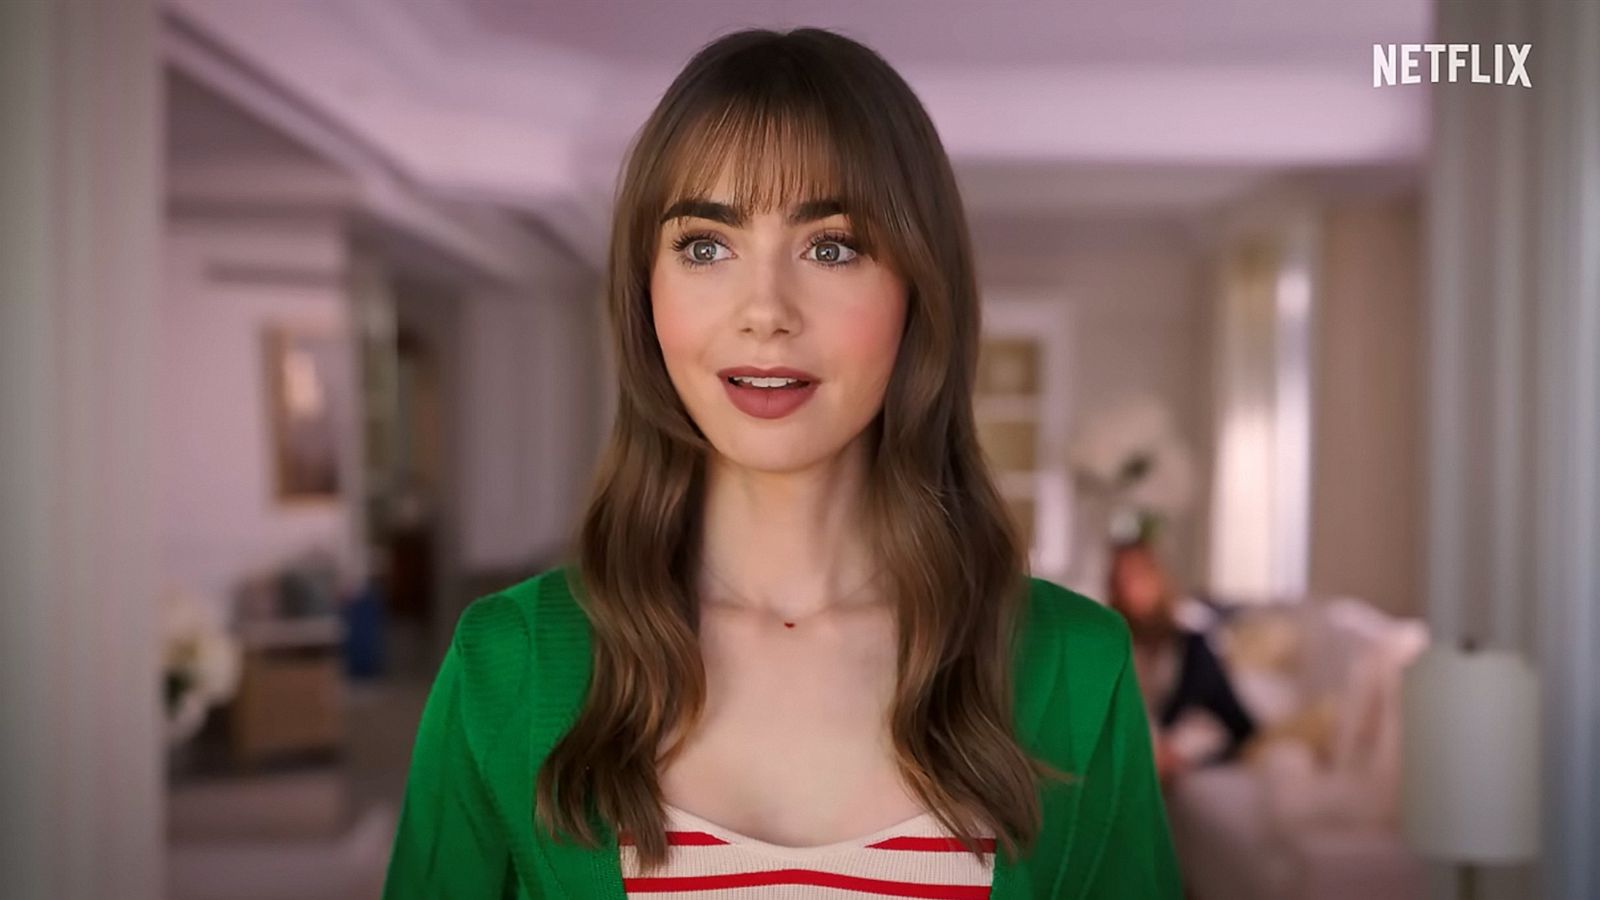 Emily in Paris: Could there be a season 3? Here's what Lily Collins says